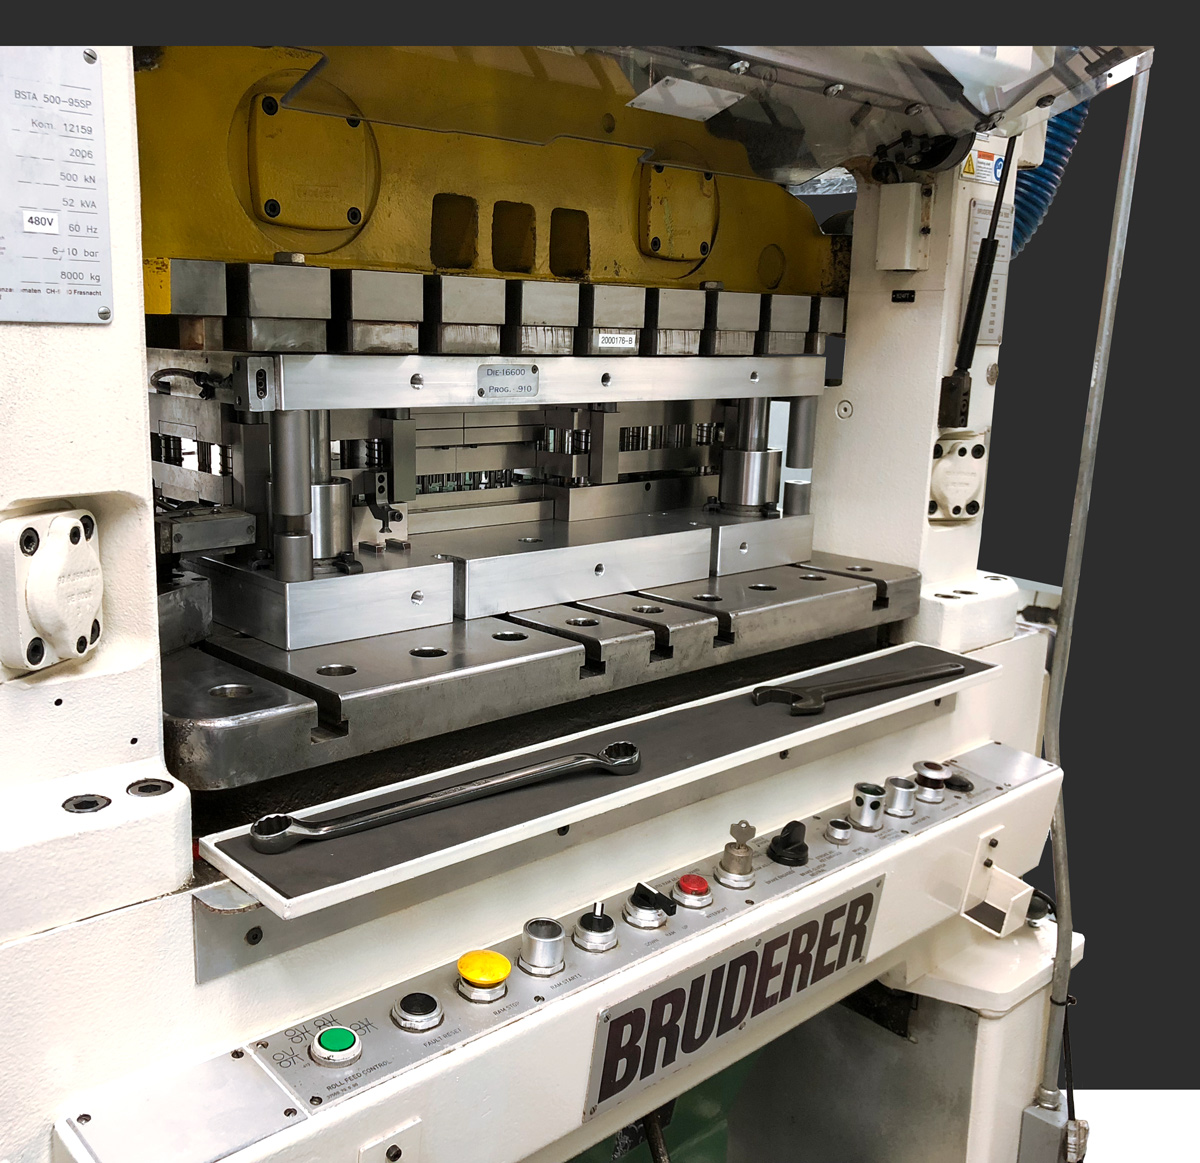 Precision forming made possible by a Bruderer press